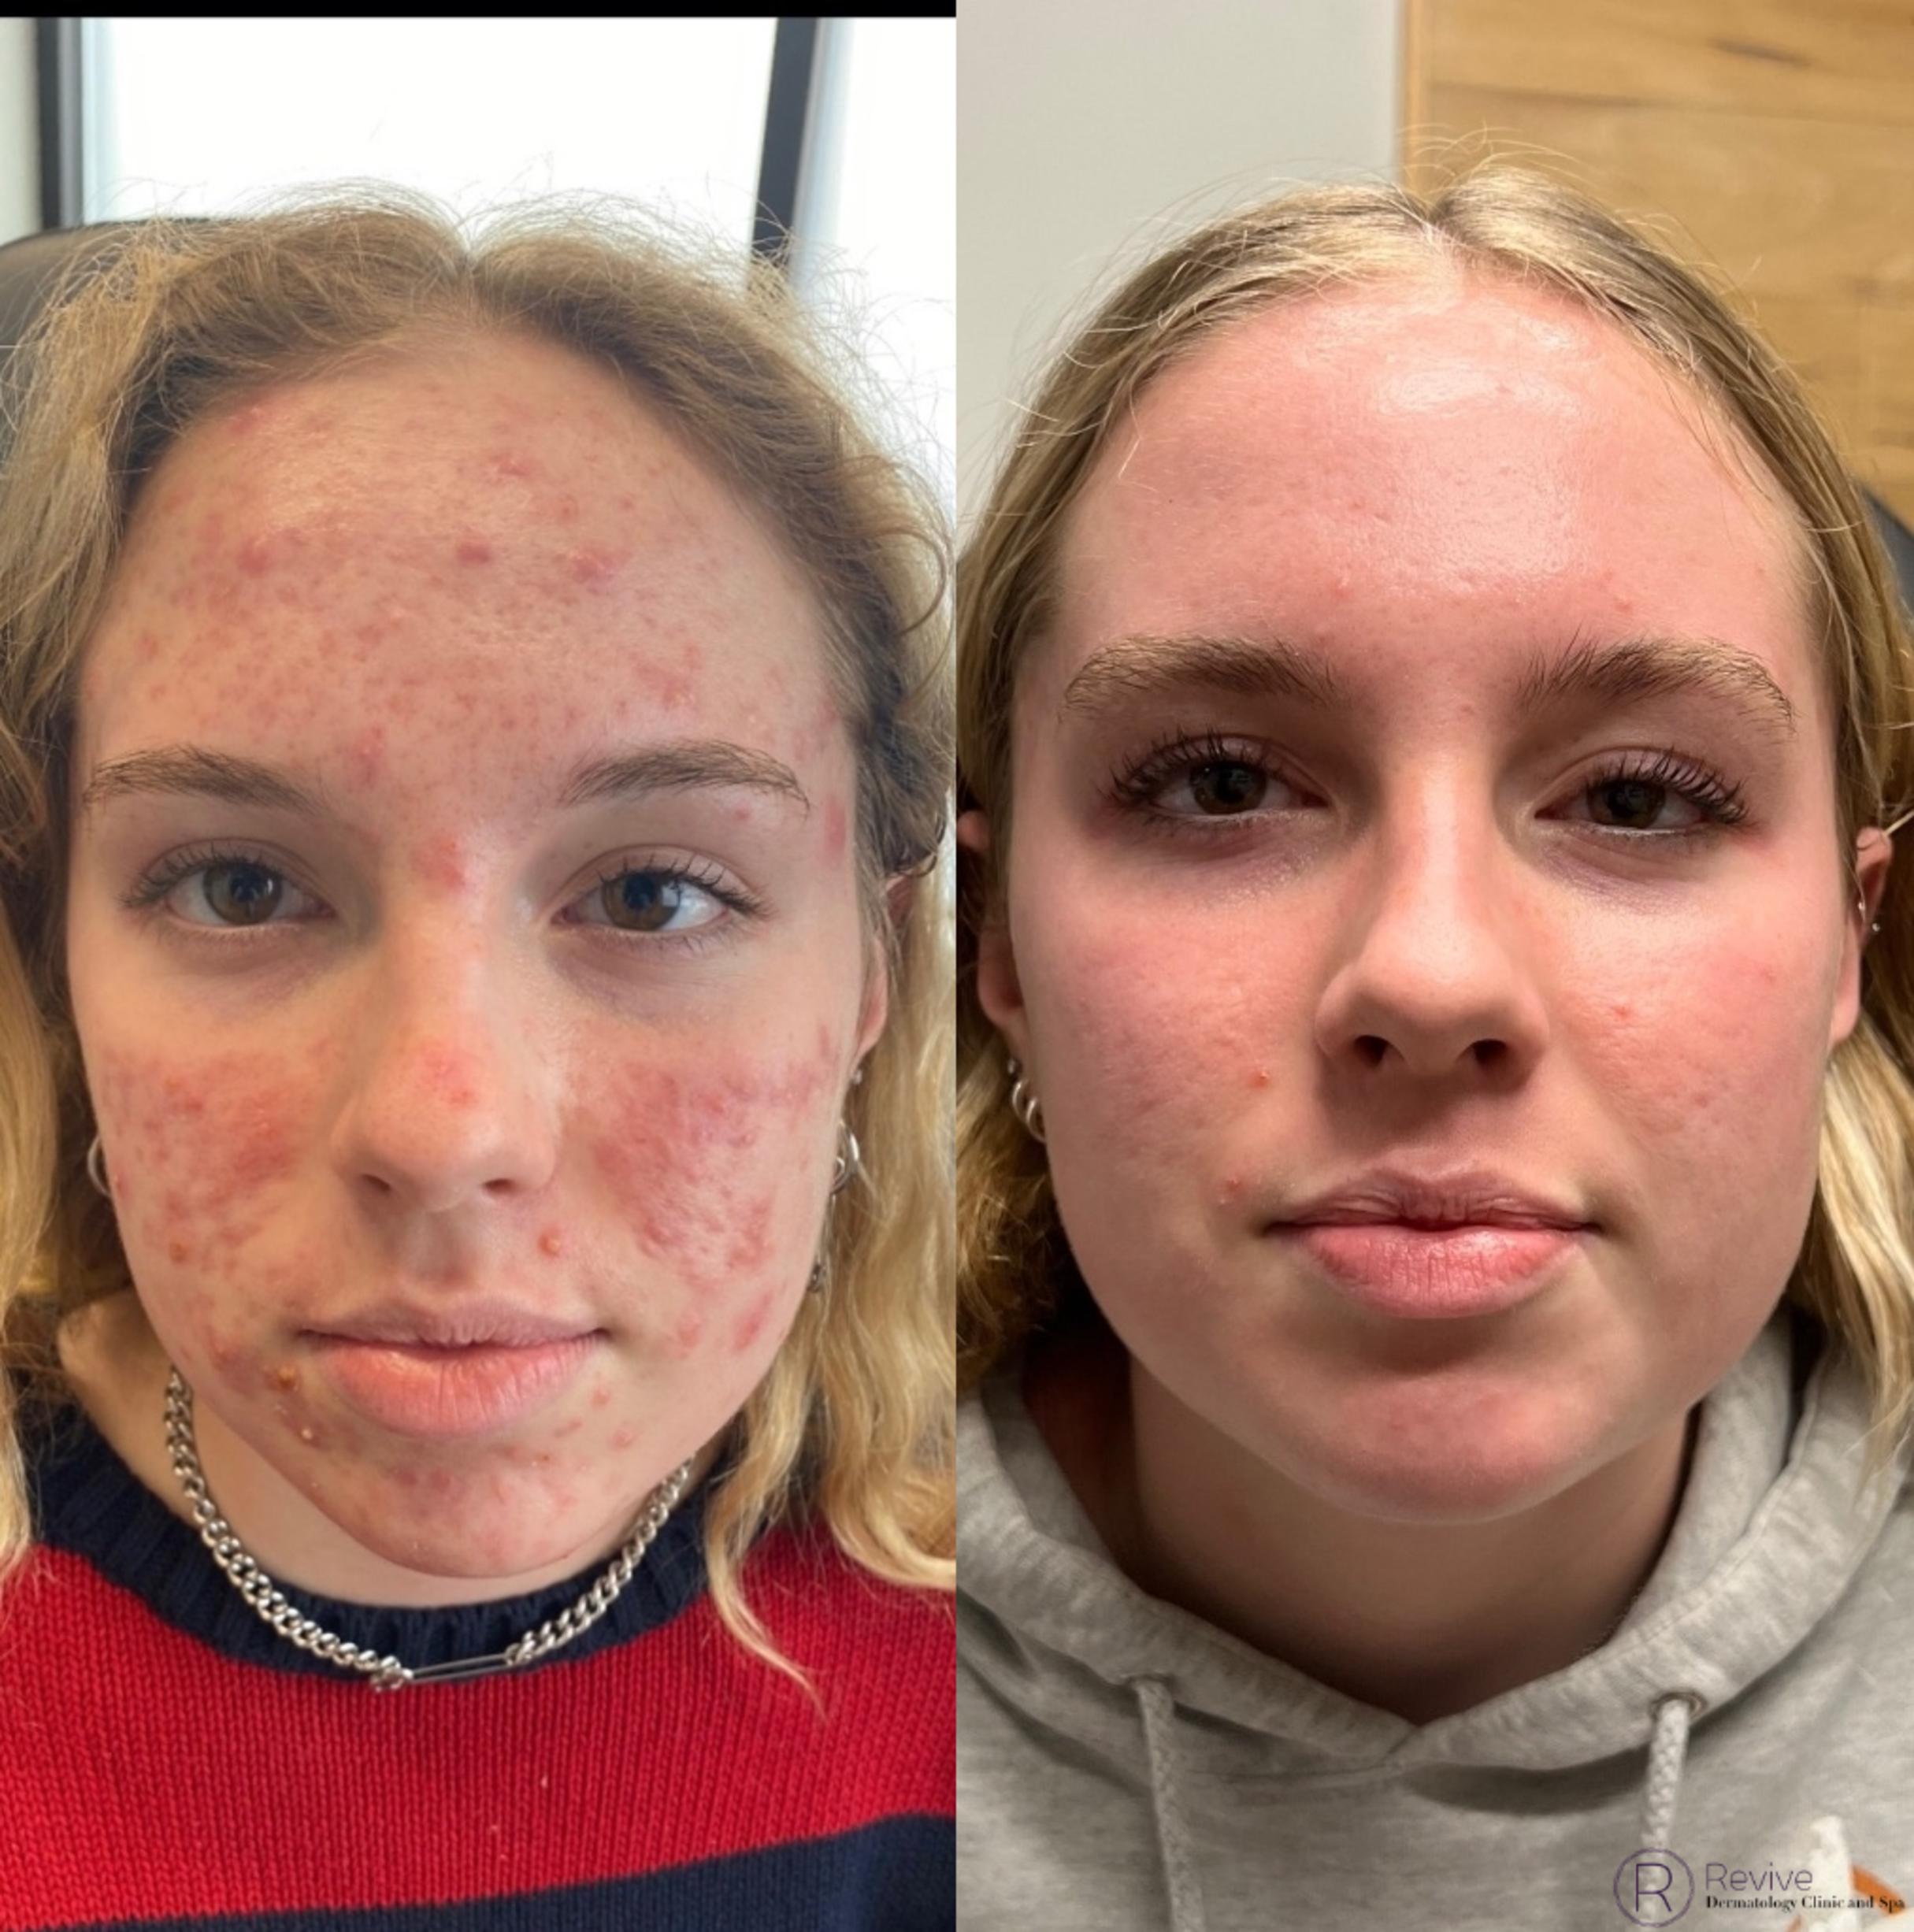 Teenage Acne Before and After